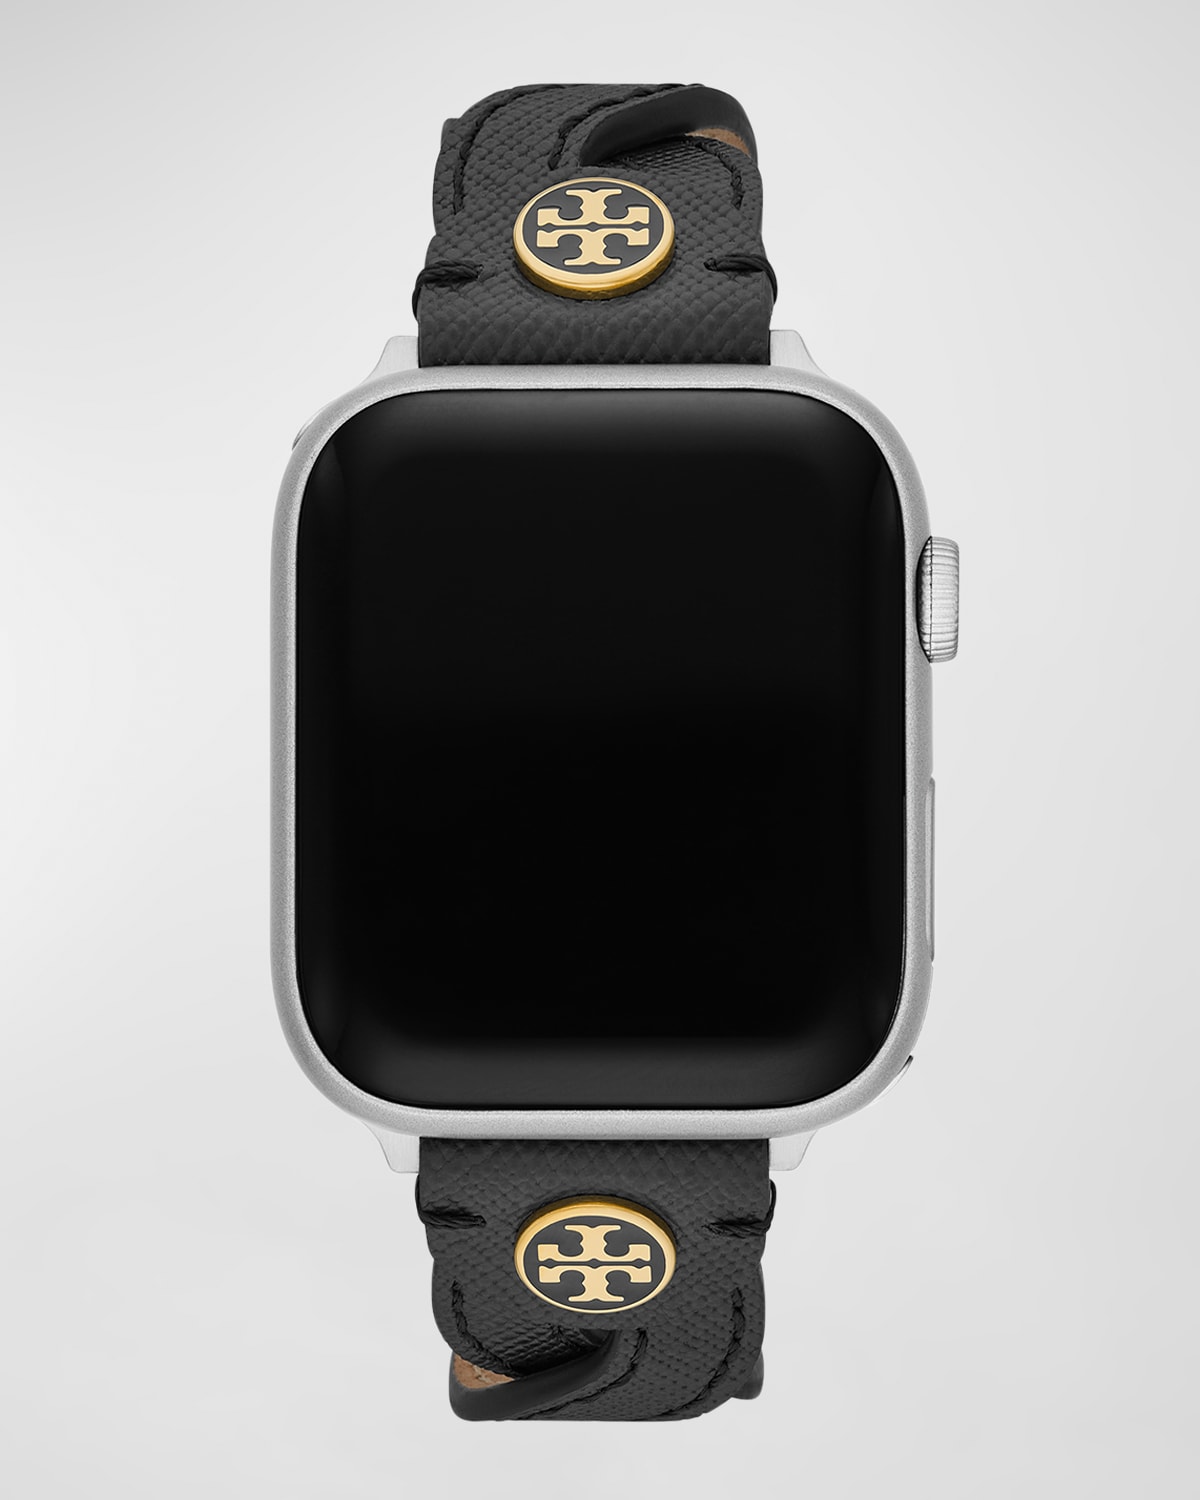 Tory Burch Braided Leather Apple Watch Band In Black, 38-41mm | ModeSens